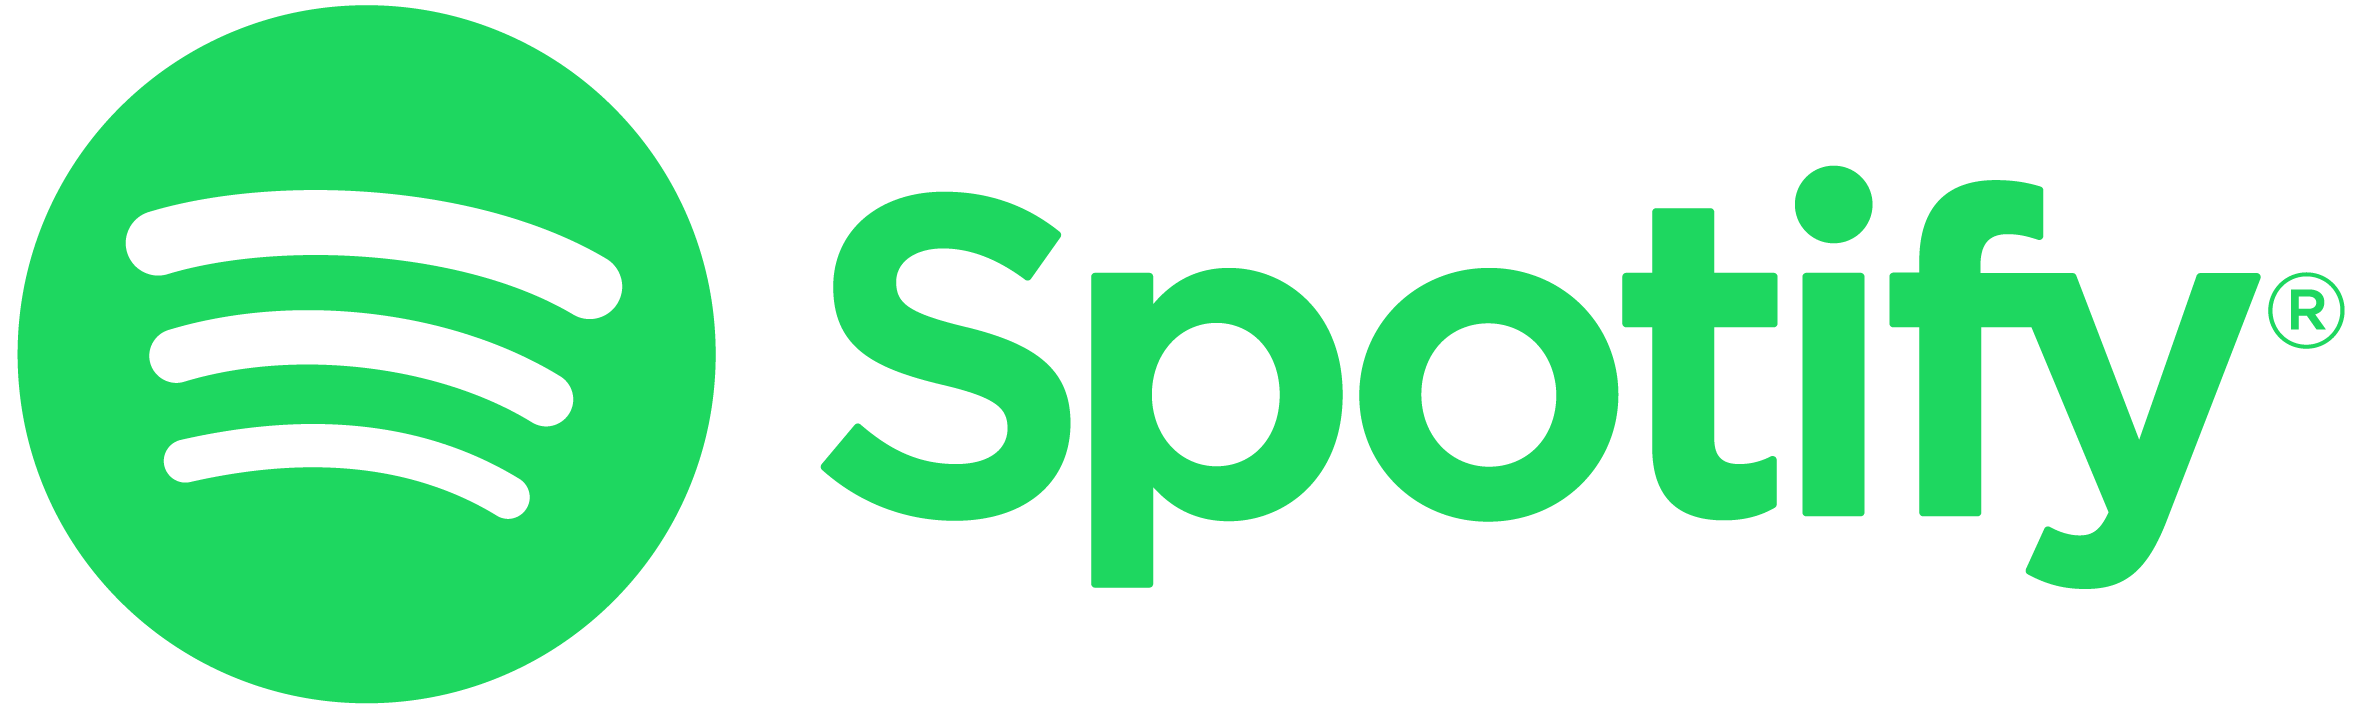 Larger Spotify logo in green letters on transparent media